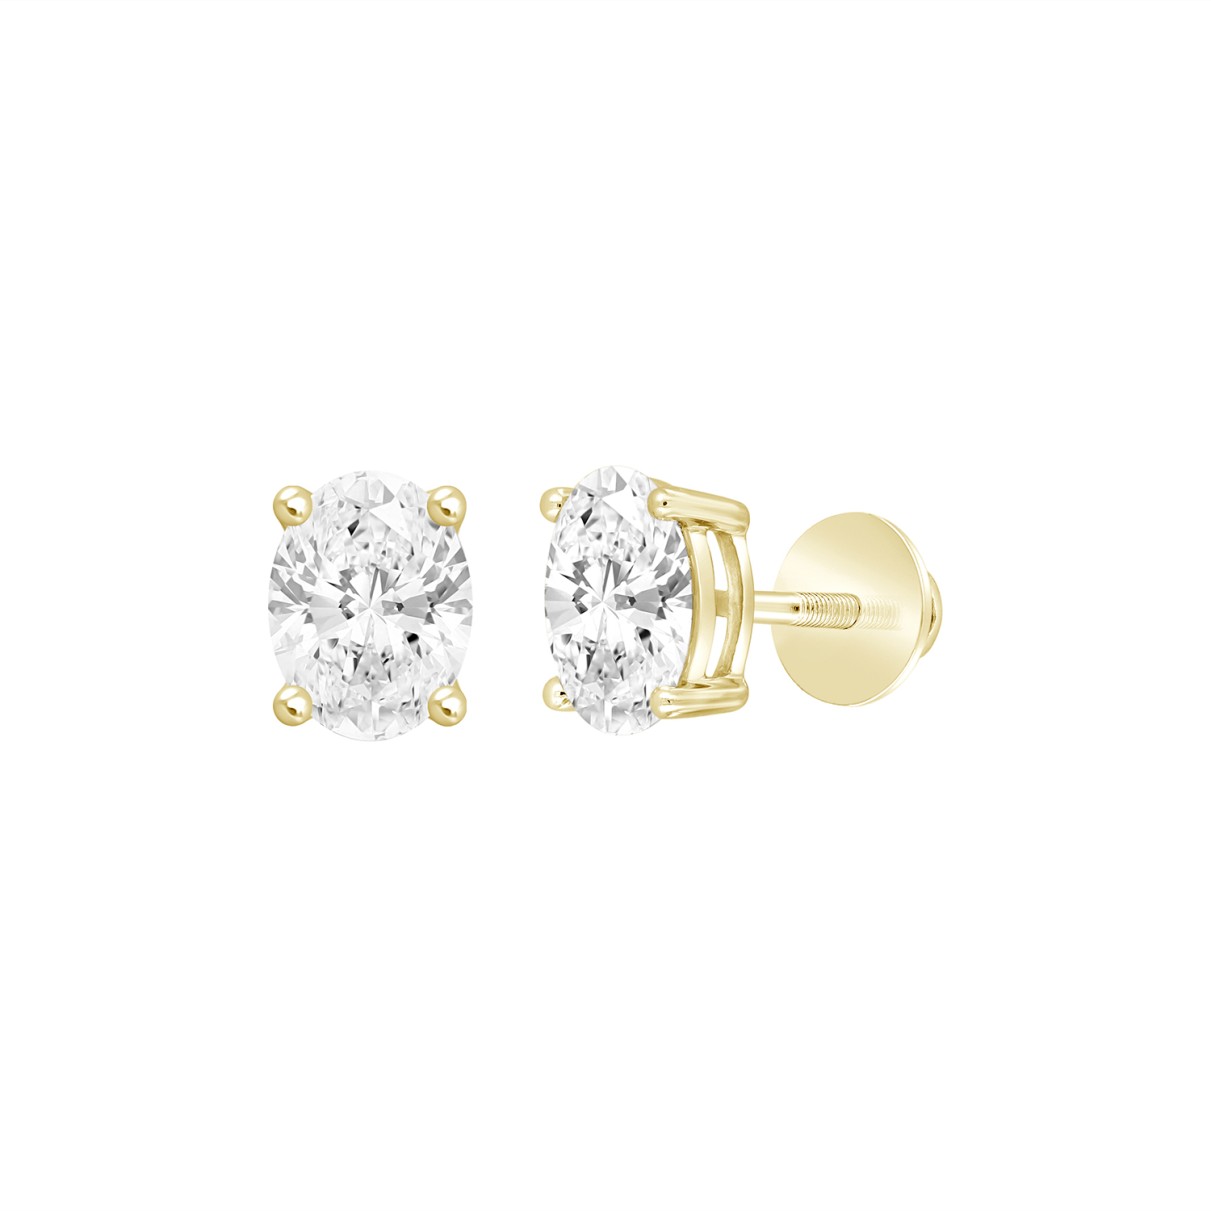 LADIES SOLITAIRE EARRINGS 1 1/2CT OVAL DIAMOND 14K YELLOW GOLD